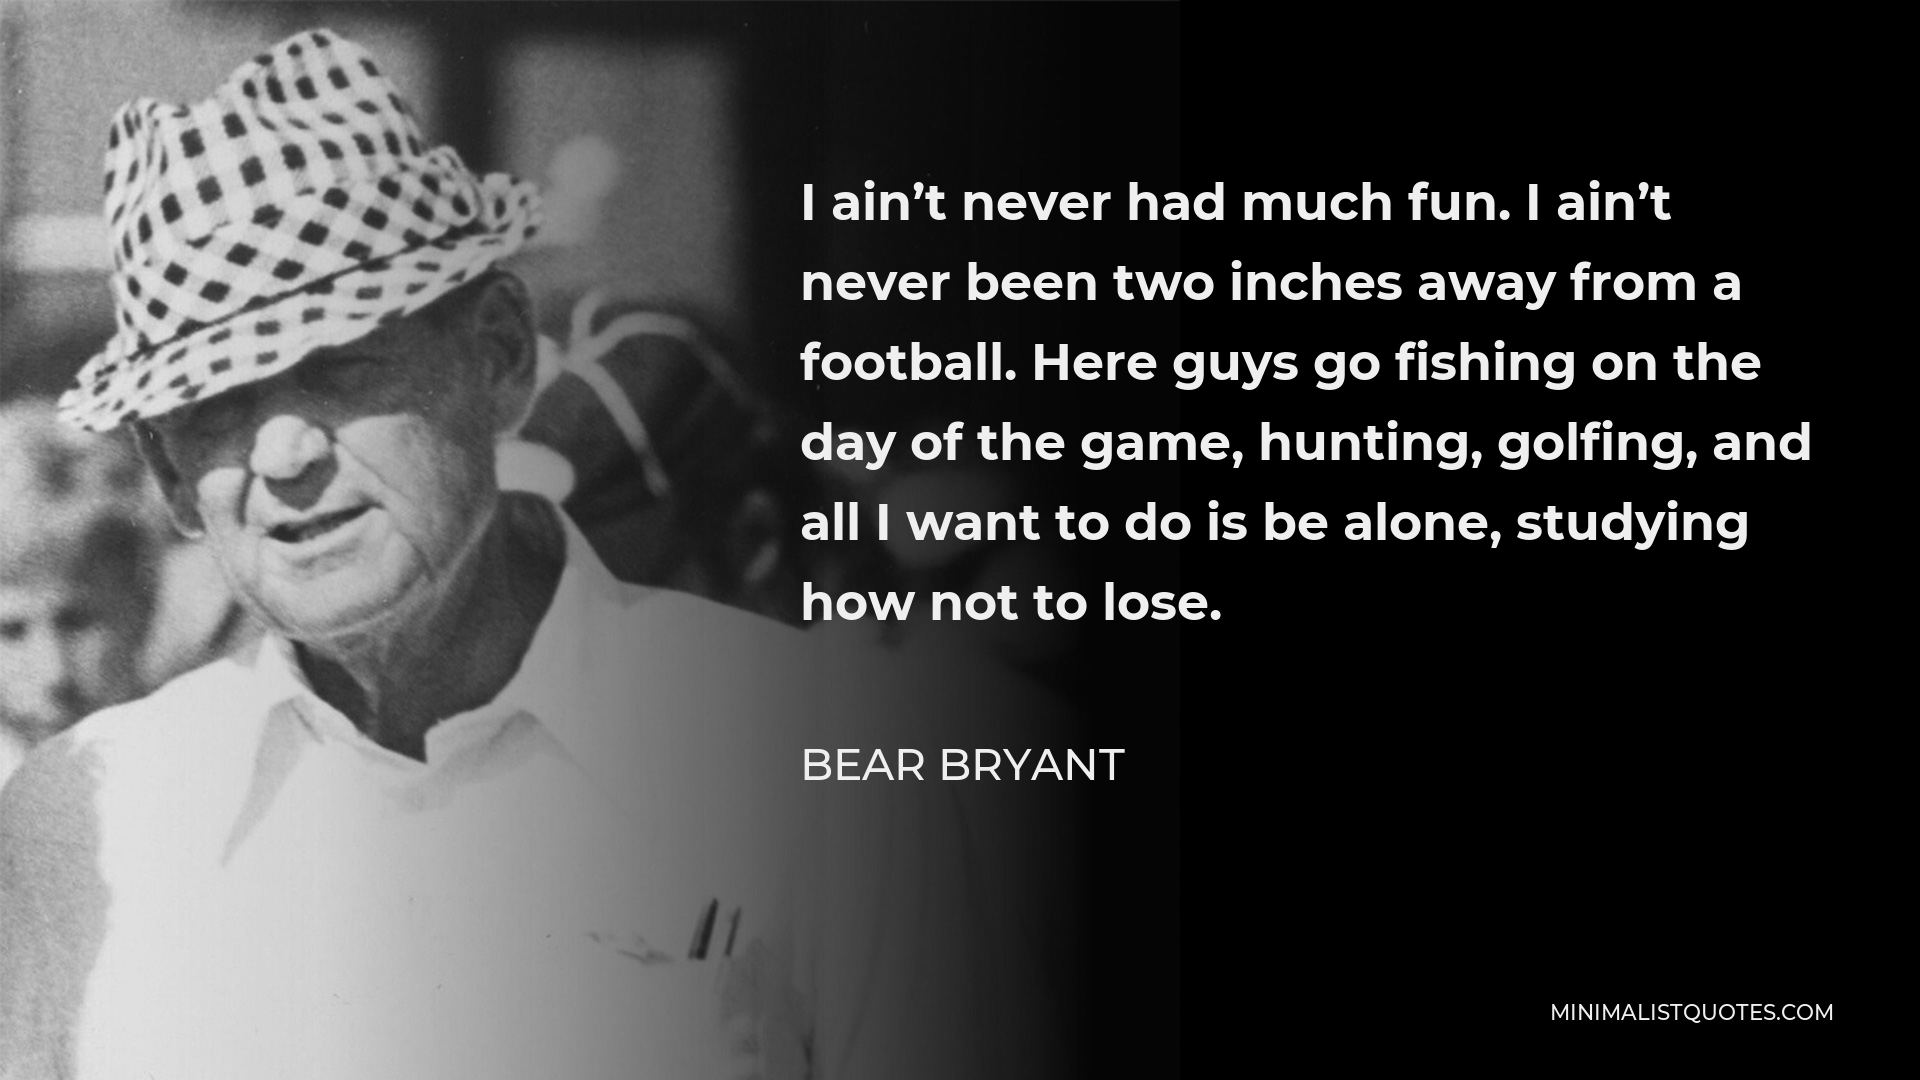 Bear Bryant Quote - I ain’t never had much fun. I ain’t never been two inches away from a football. Here guys go fishing on the day of the game, hunting, golfing, and all I want to do is be alone, studying how not to lose.